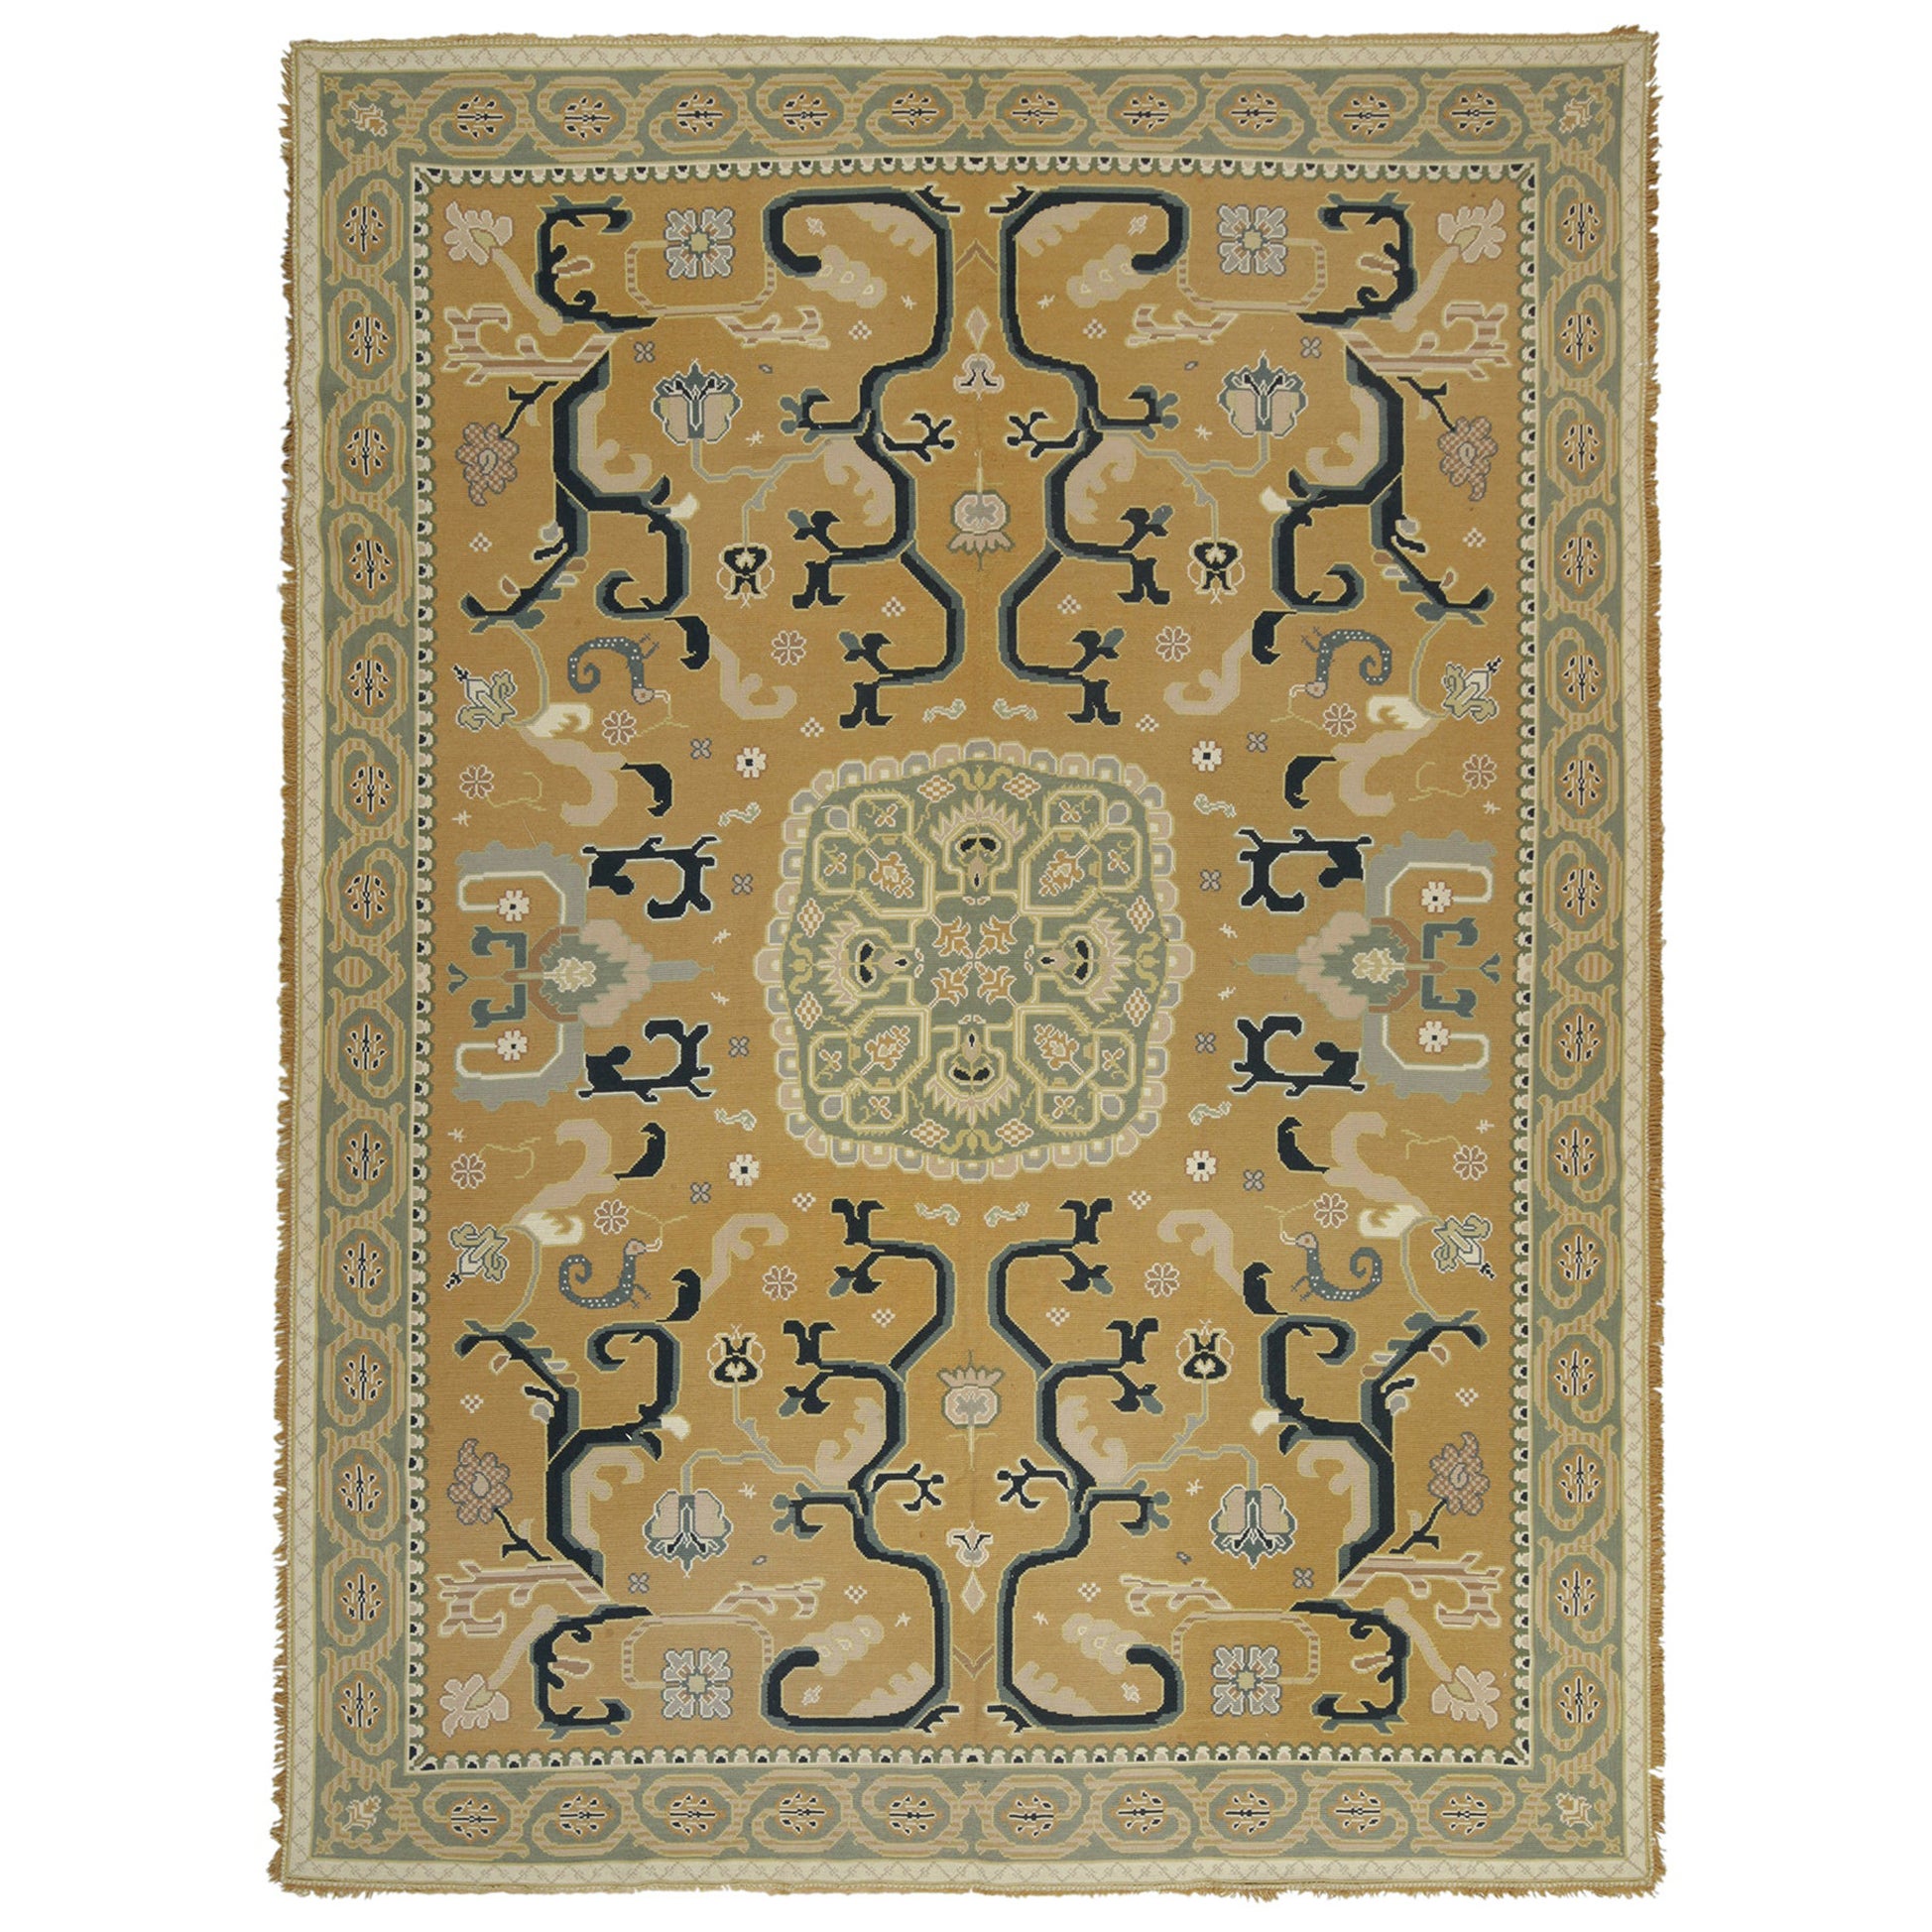 Antique Needlepoint Rug in Gold with Blue Medallion and Florals